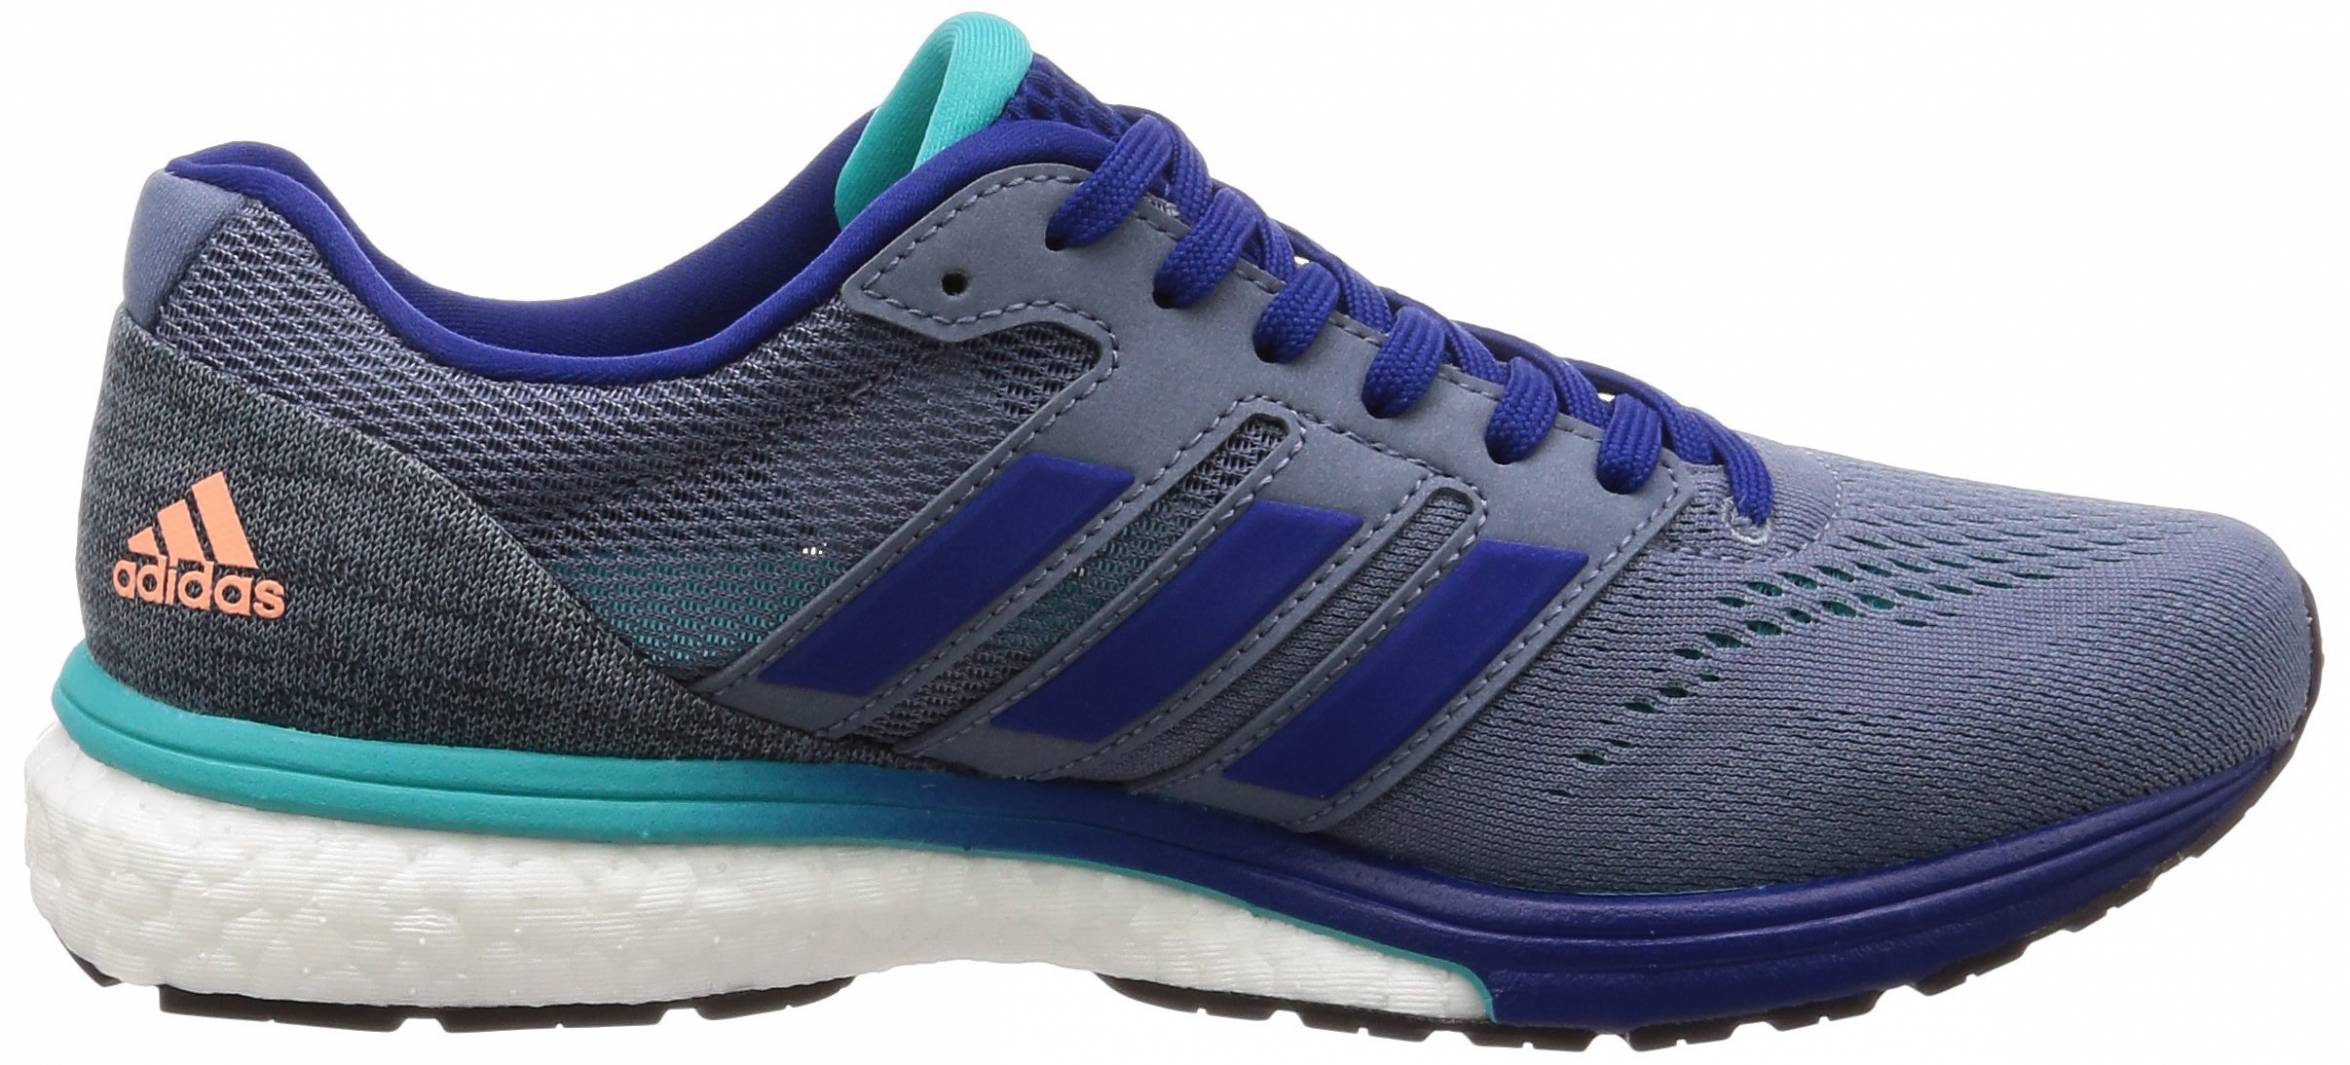 Ridiculous Equivalent is there Adidas Adizero Boston Boost 7 Review 2022, Facts, Deals ($55) | RunRepeat